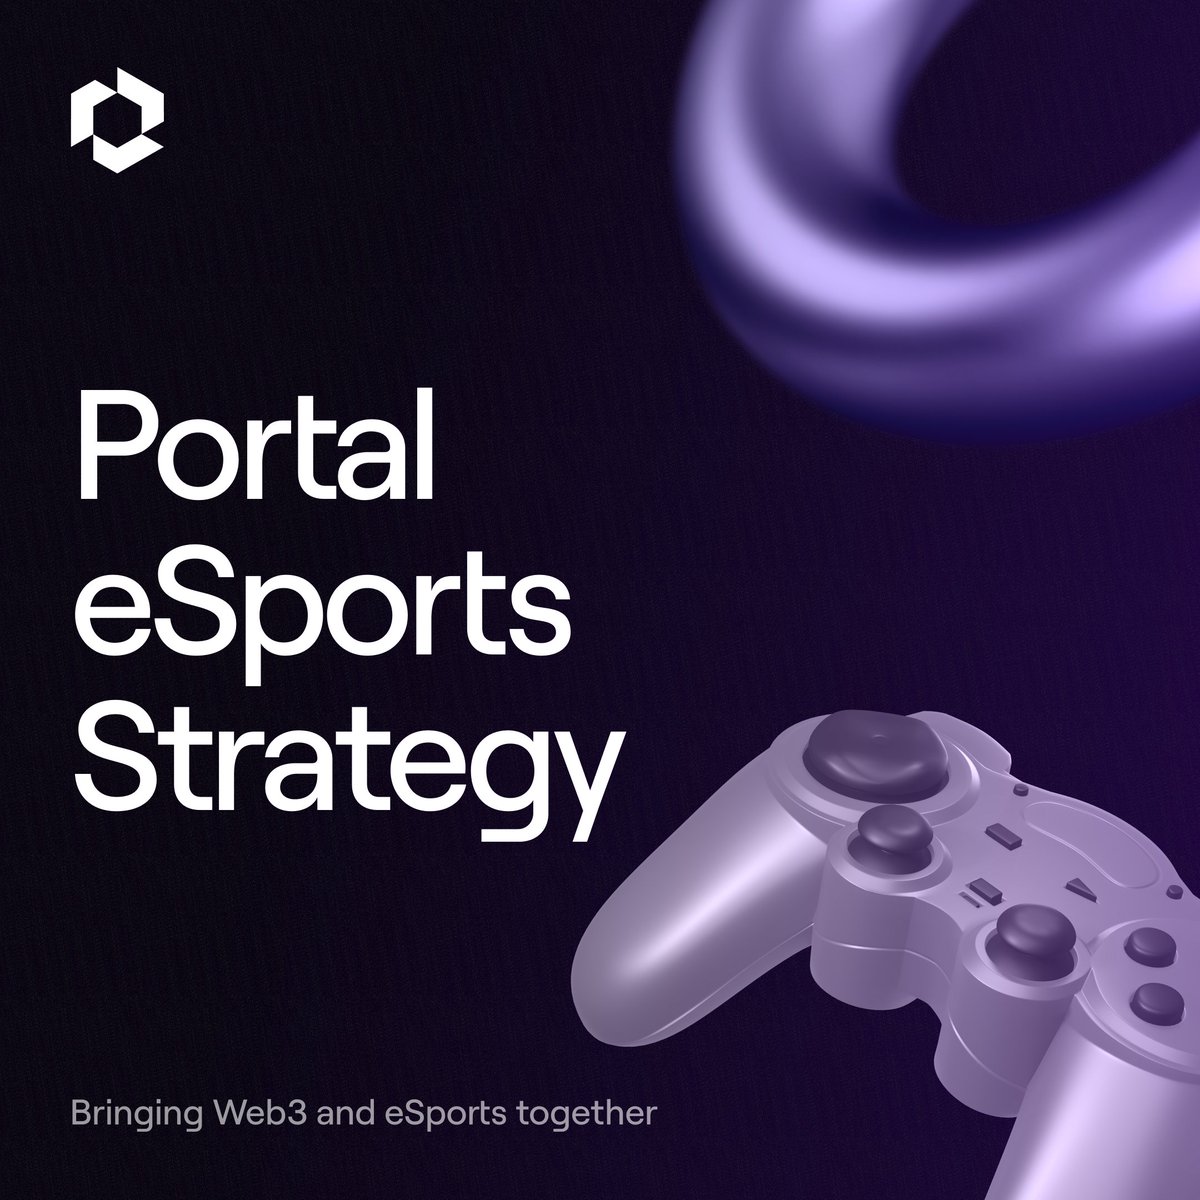 Portal is revolutionizing how mainstream audiences engage with Web3 gaming. eSports is a pivotal part of this mission. We’re solving distribution & bringing attention to our amazing partner games by broadening Portal’s reach to eSports communities around the world. 🧵1/4